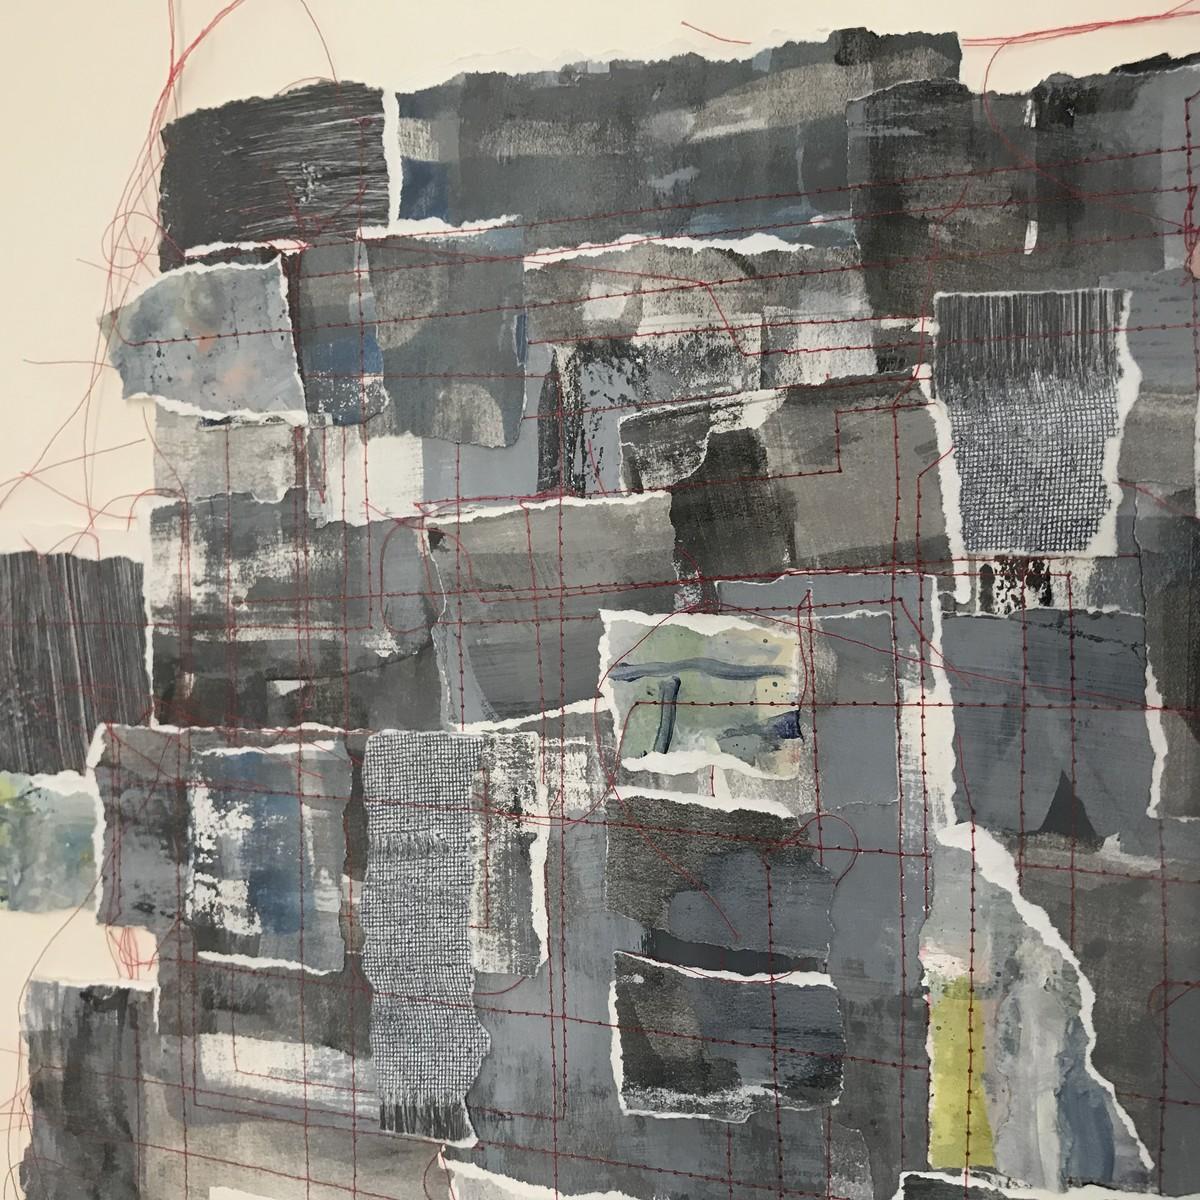 Contemporary abstract collage of disassembled gouache painting joined with red thread by American artist Sandra Constantine
Shades of grey and blue
The artist, born in 1971, lives, works and has exhibited in New York City
She focuses on collage,